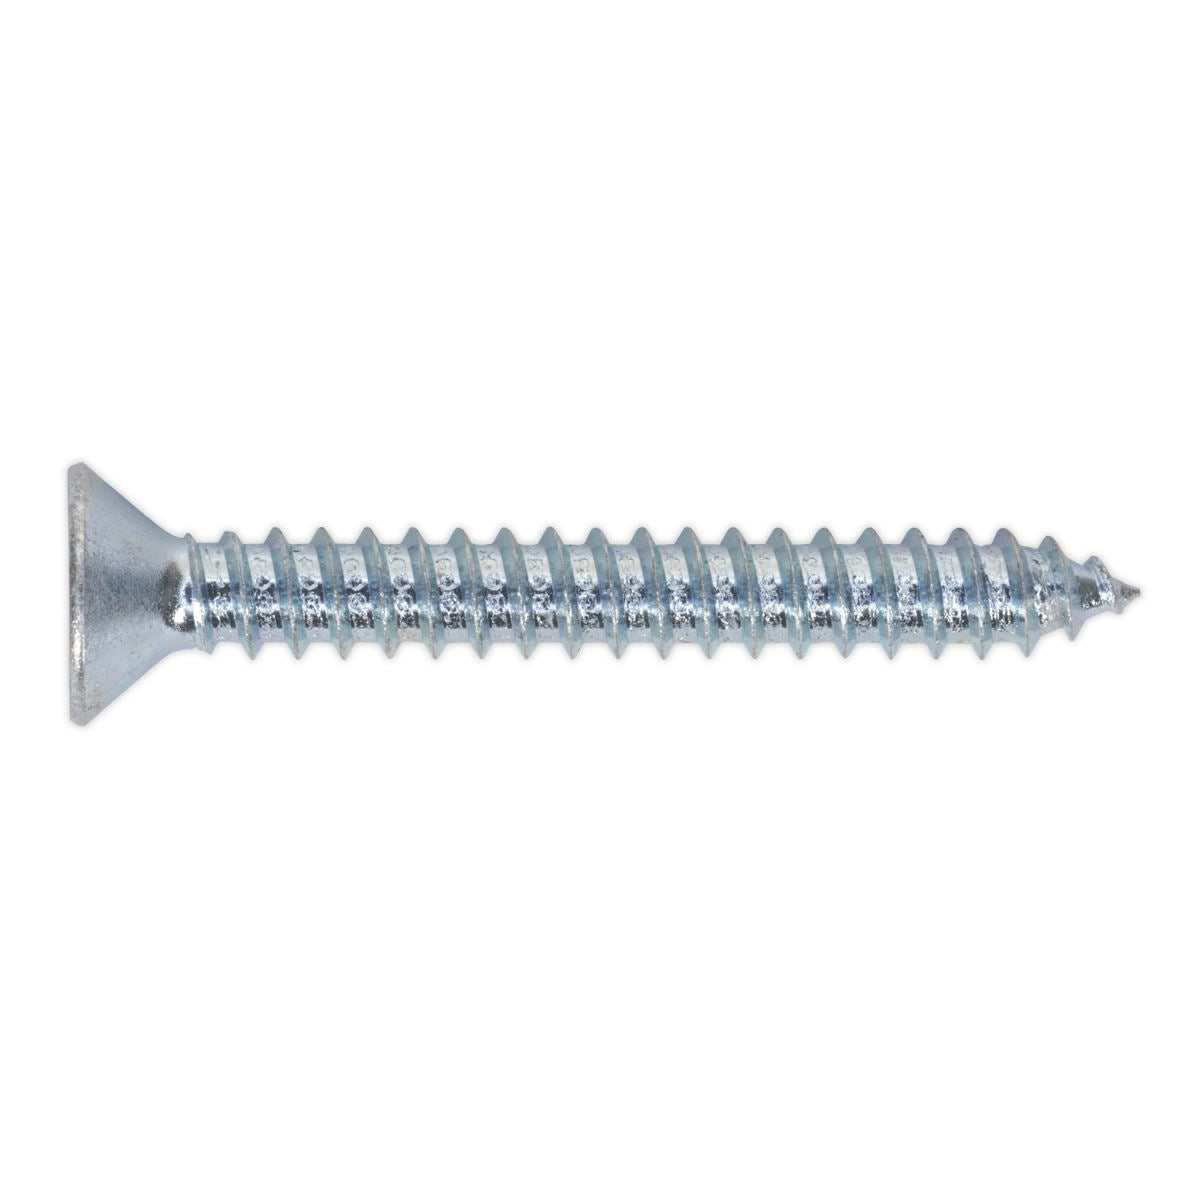 Sealey Self Tapping Screw 4.8 x 38mm Countersunk Pozi Pack of 100